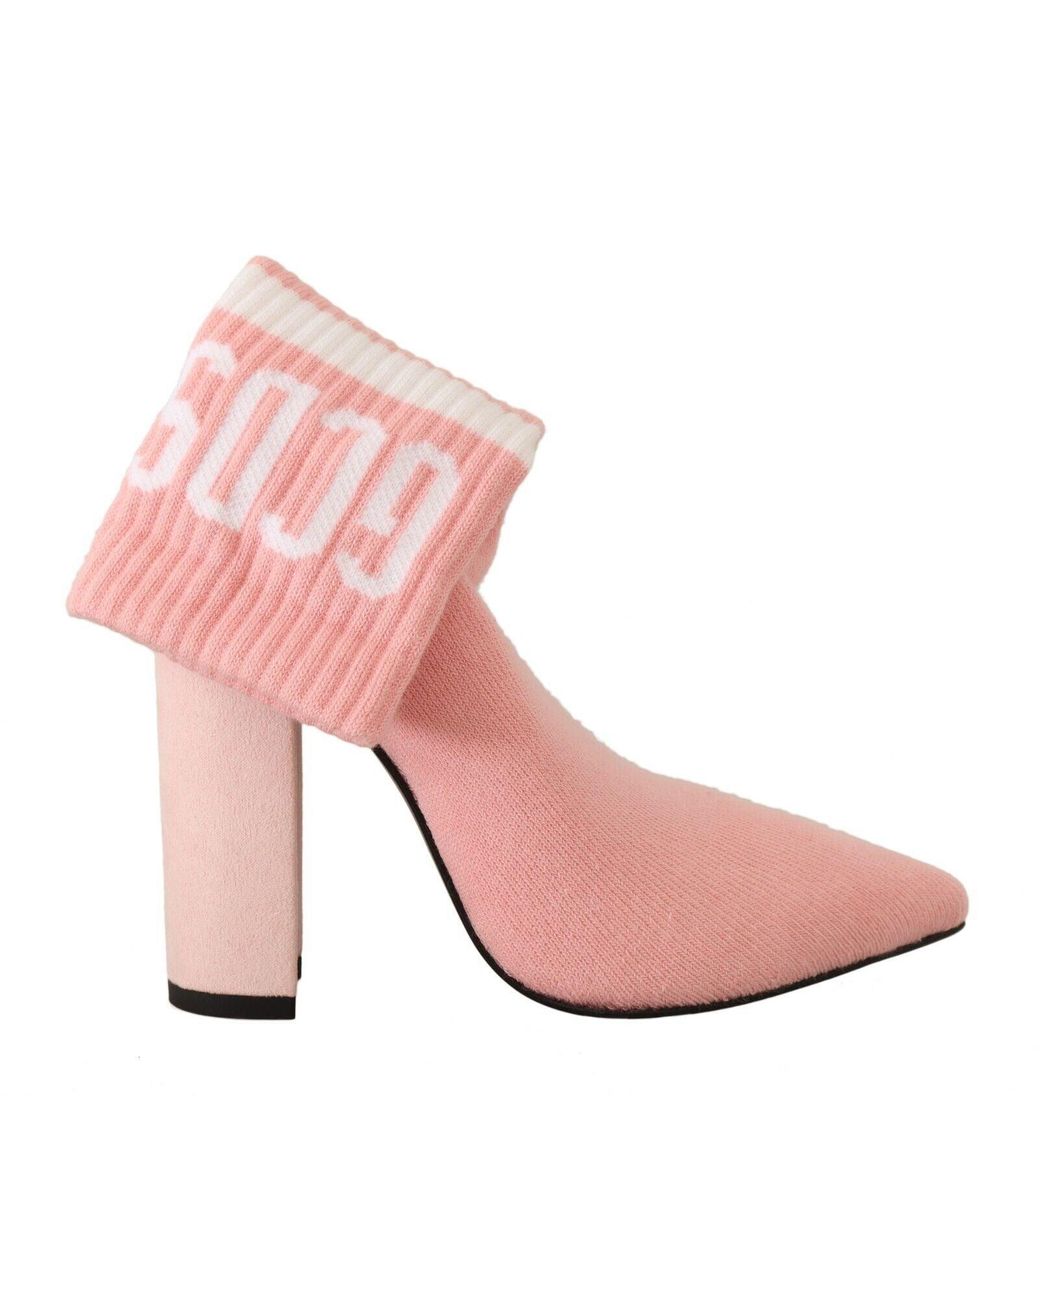 Louis Vuitton pink Leather Silhouette Ankle Boots 100